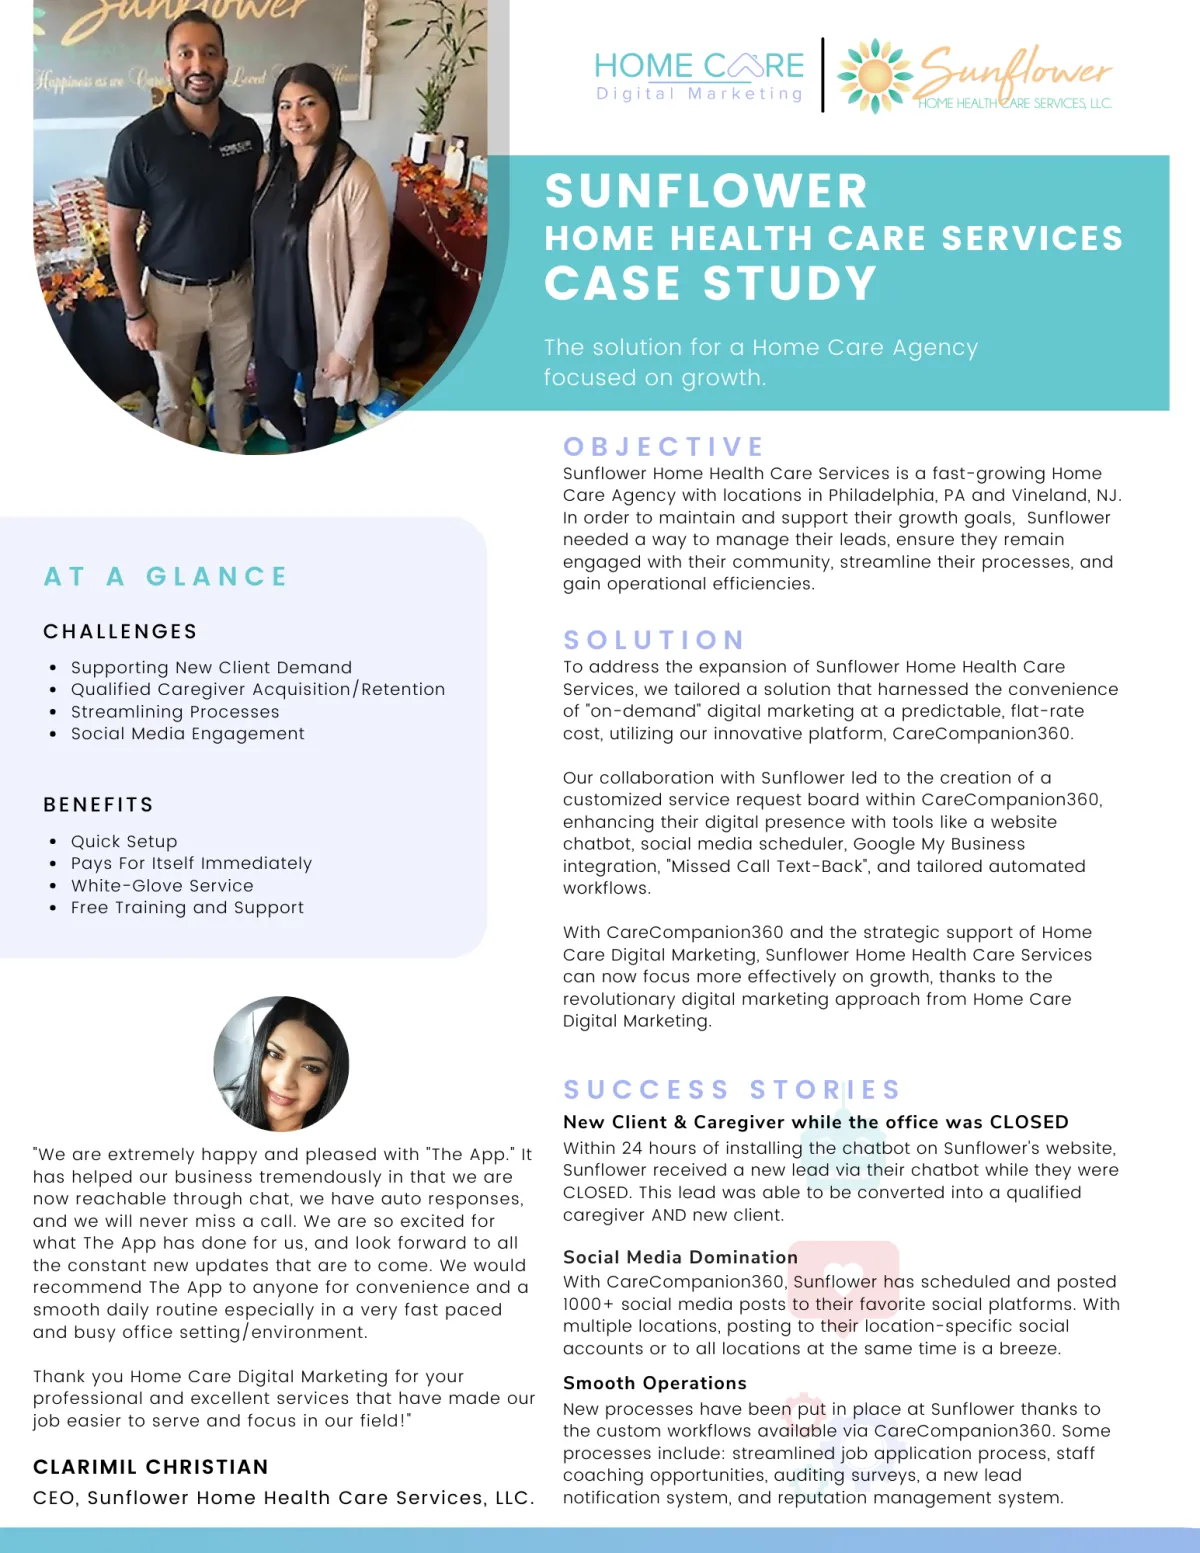 Sunflower Home Health Care Services and Home Care Digital Marketing Case Study